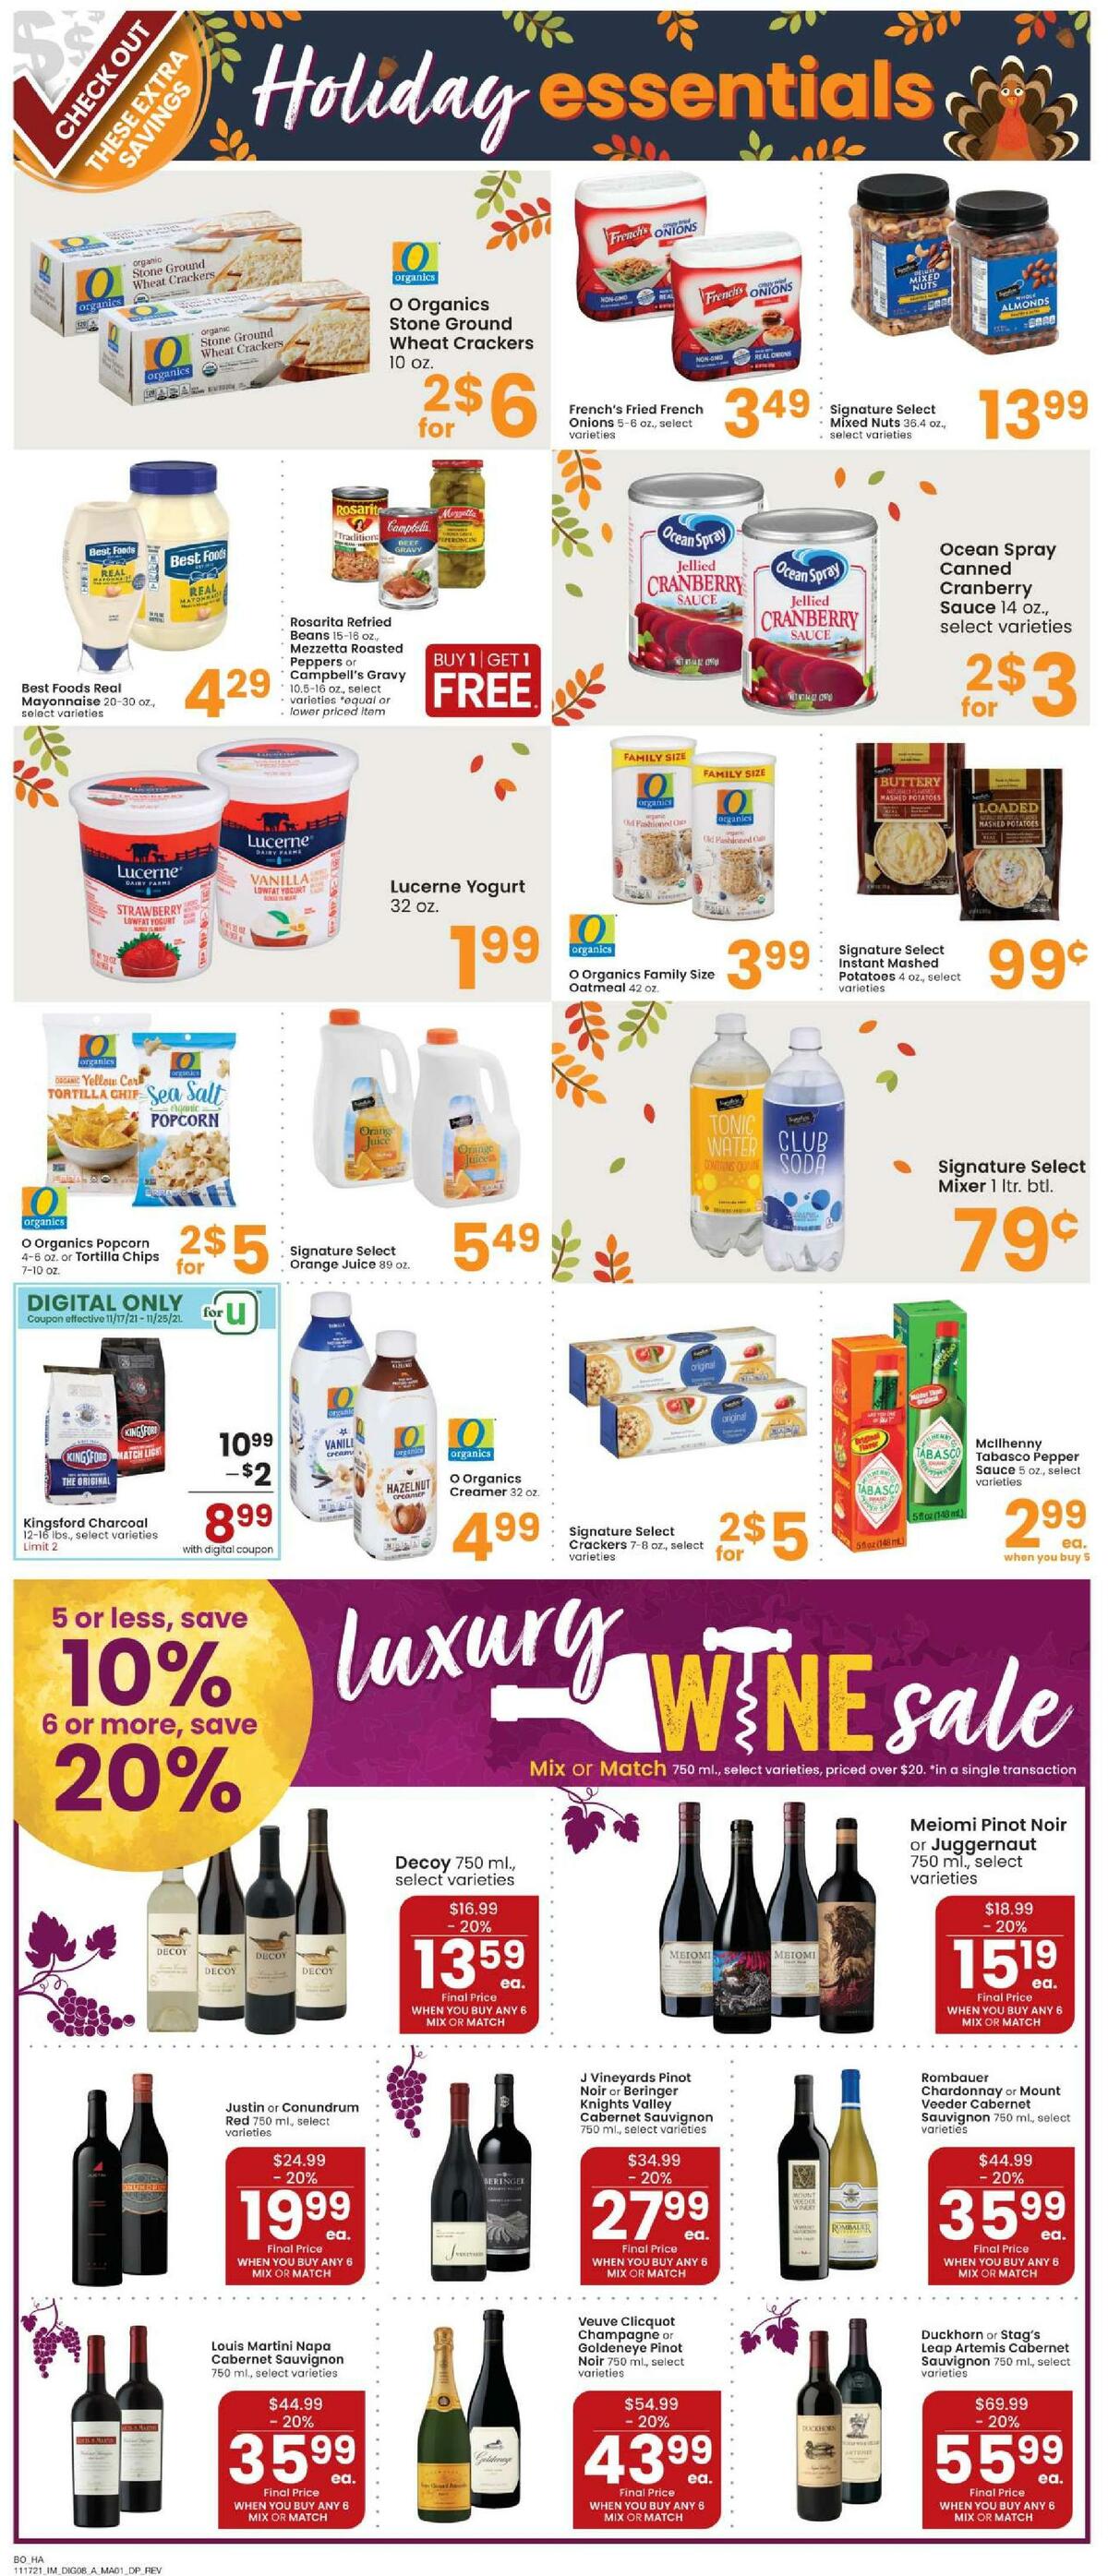 Albertsons Weekly Ad from November 17